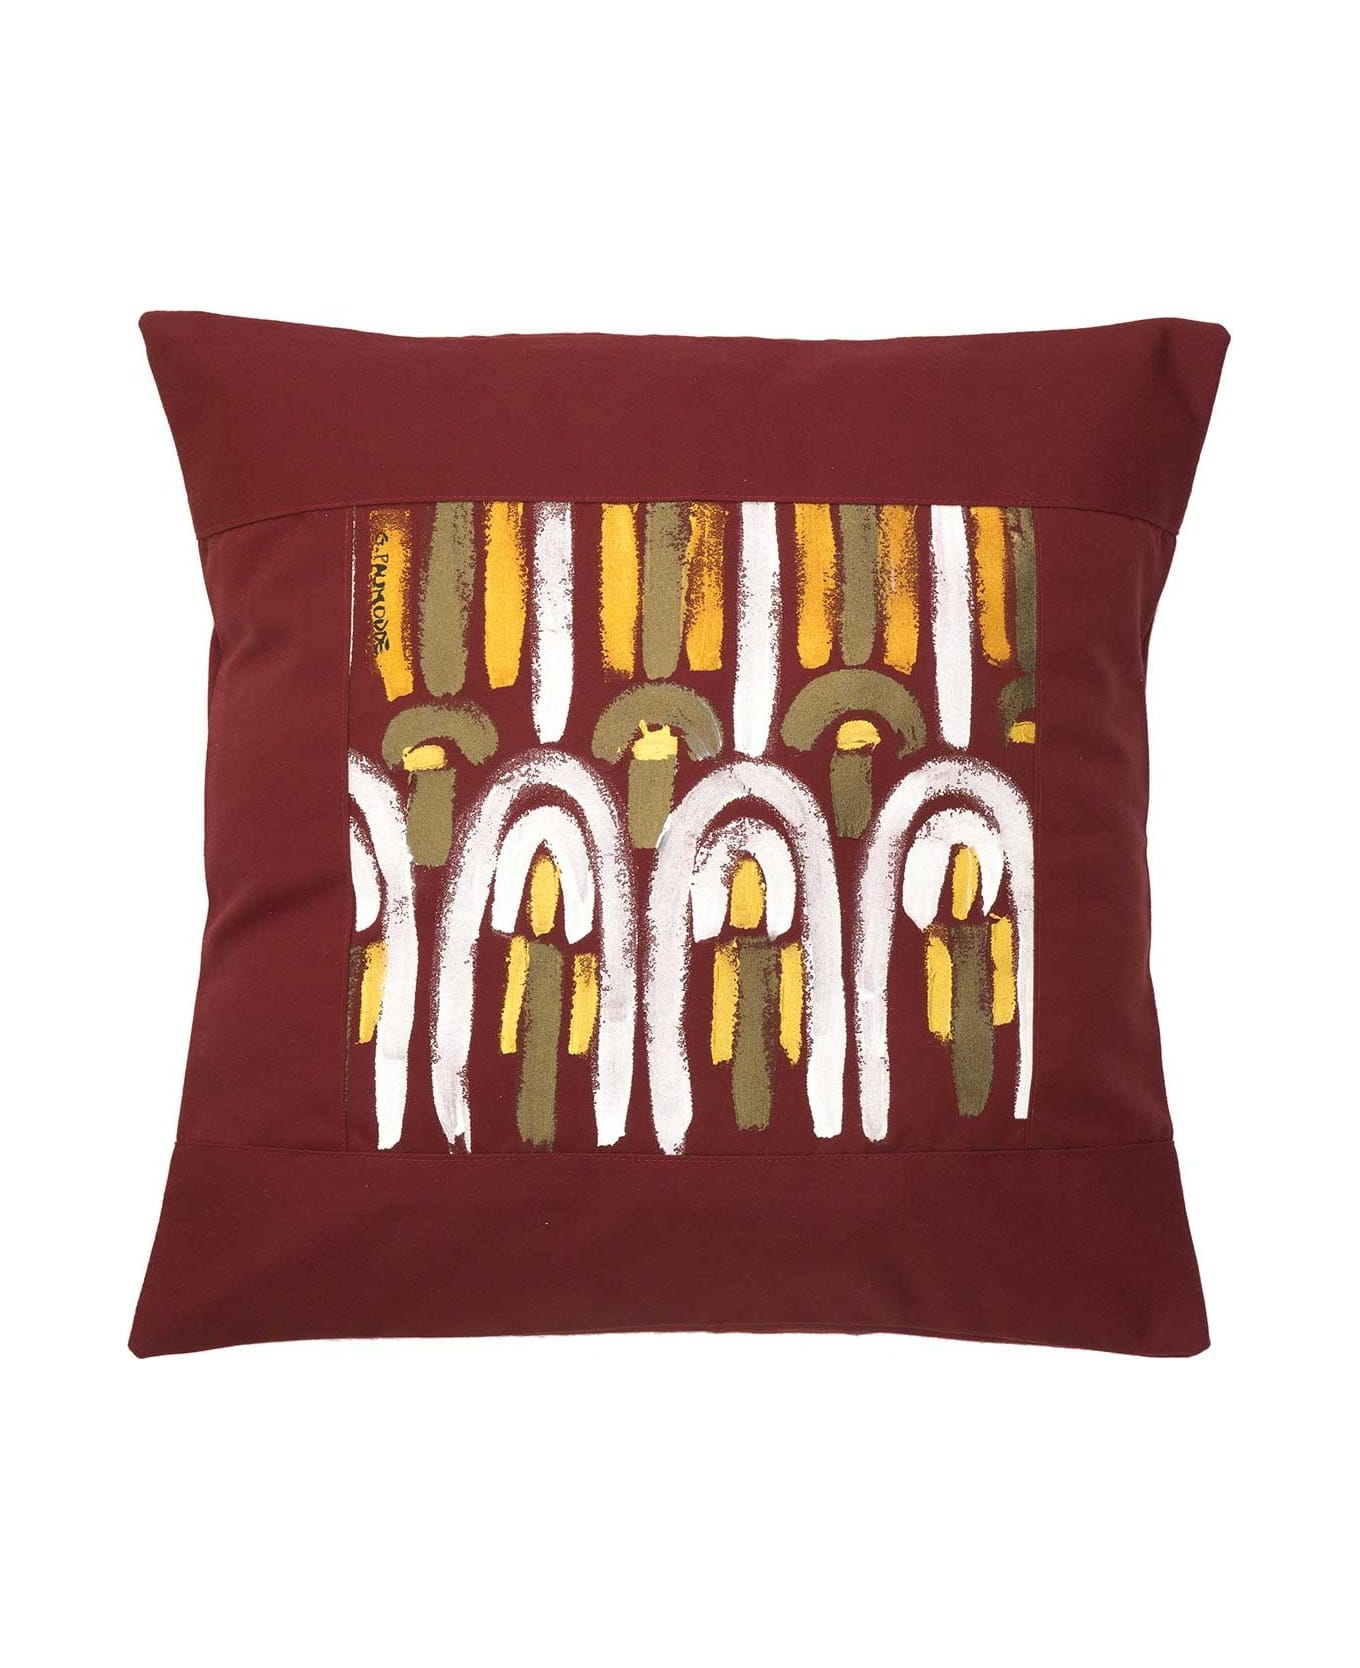 Le Botteghe su Gologone Acrylic Hand Painted Outdoor Cushion 50x50 cm - Red Fantasy